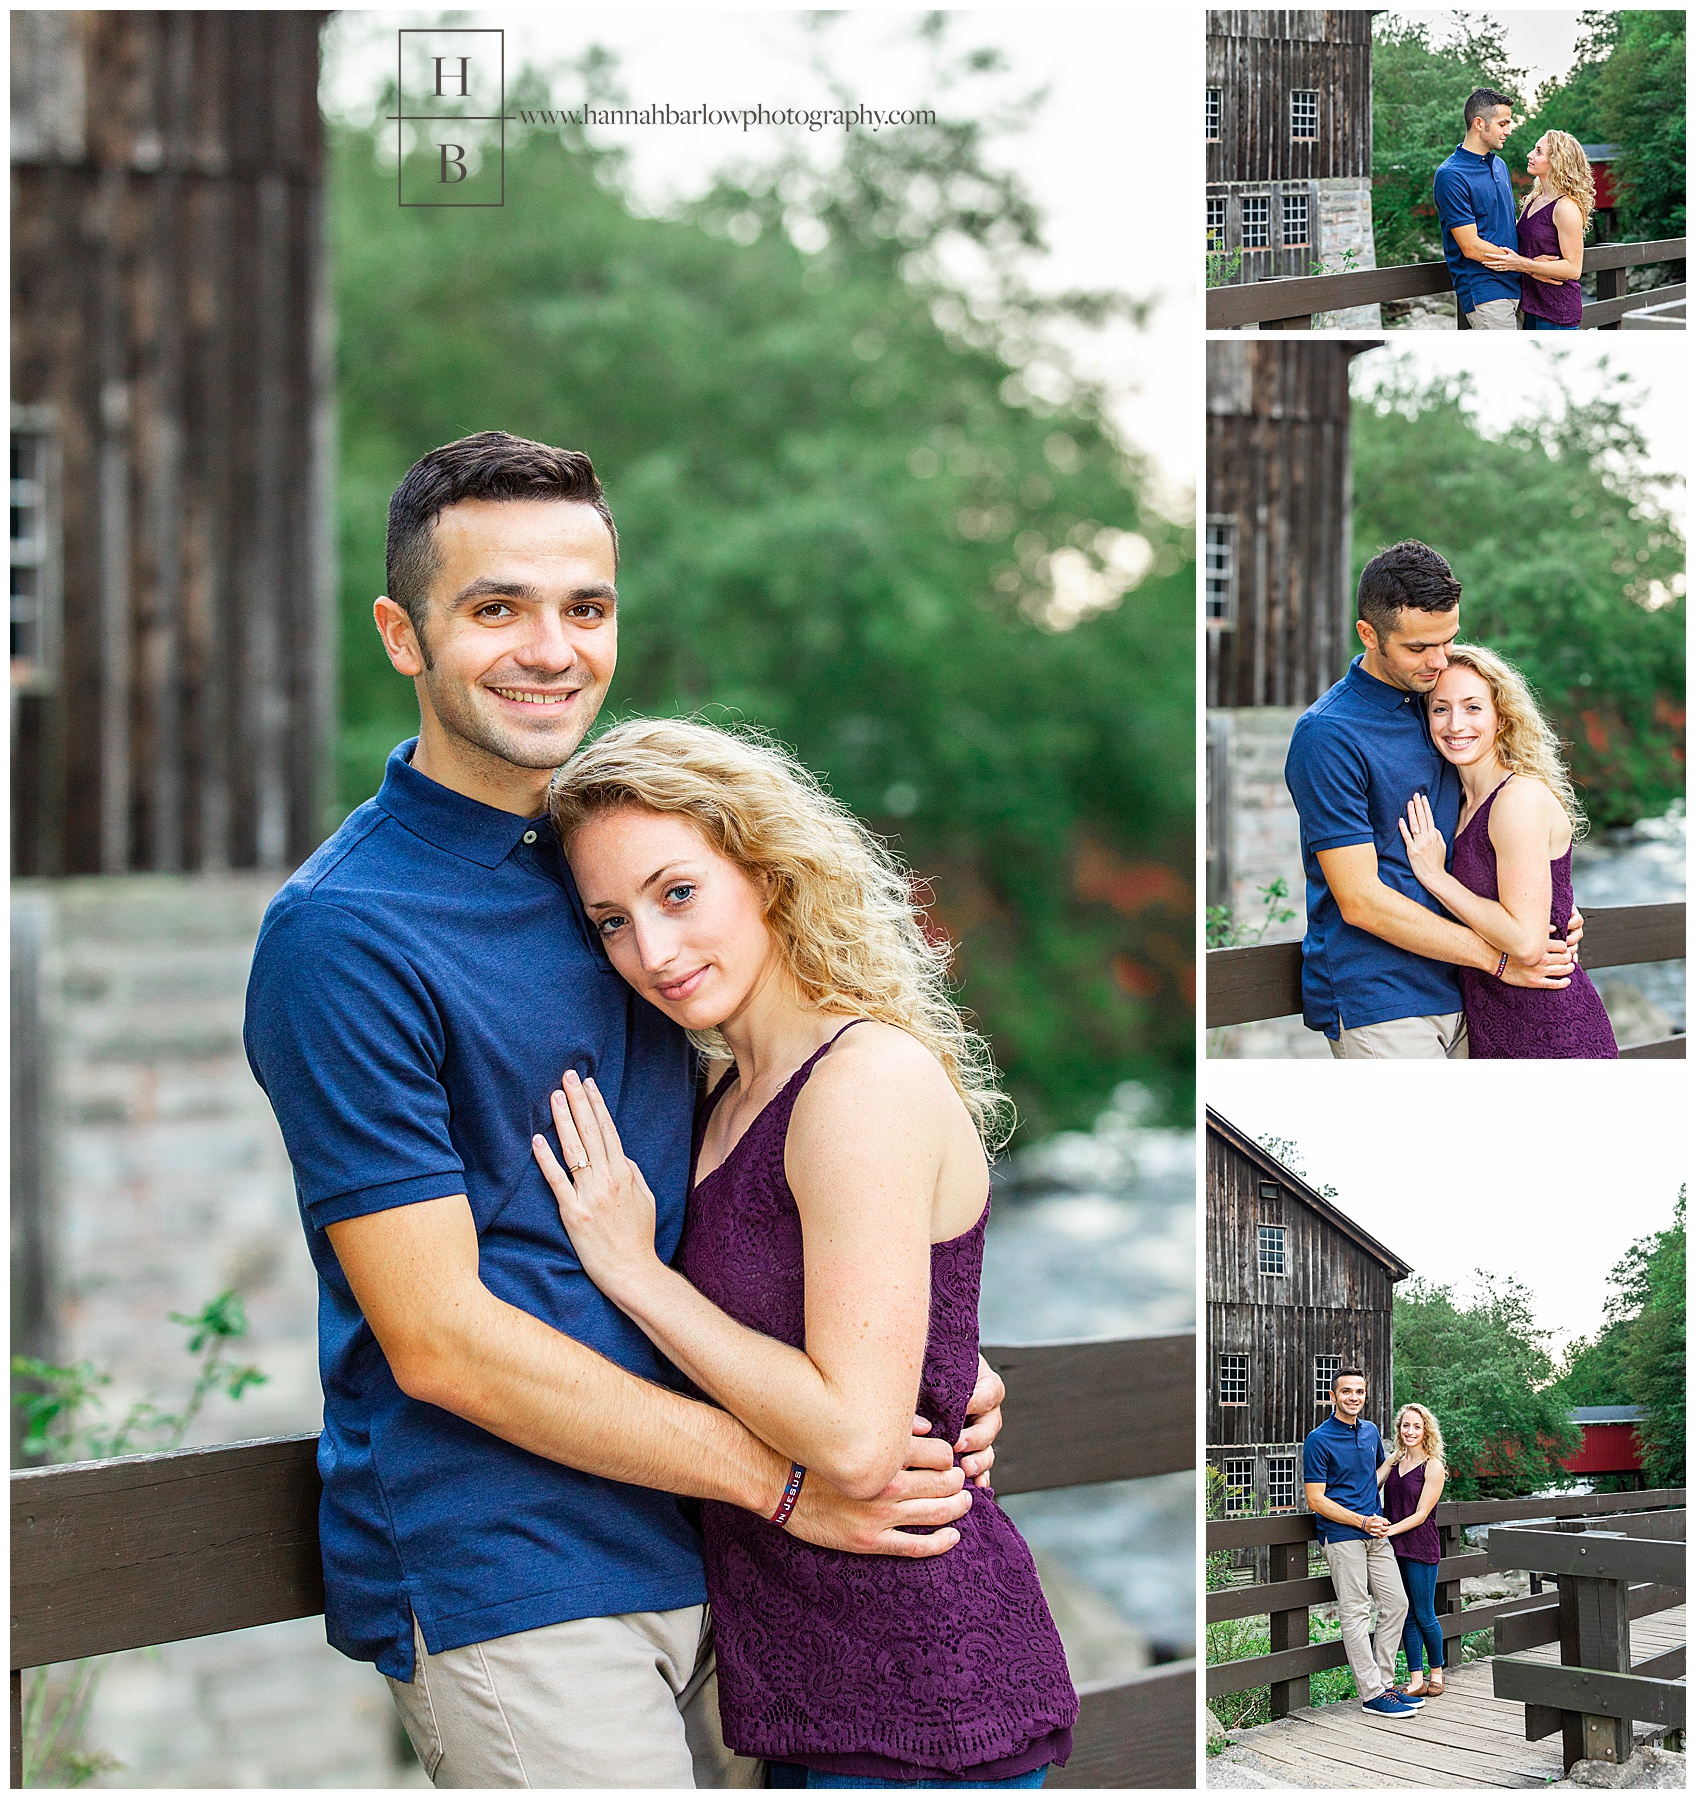 Couple on Overlook in Portersville, PA for Engagement Session